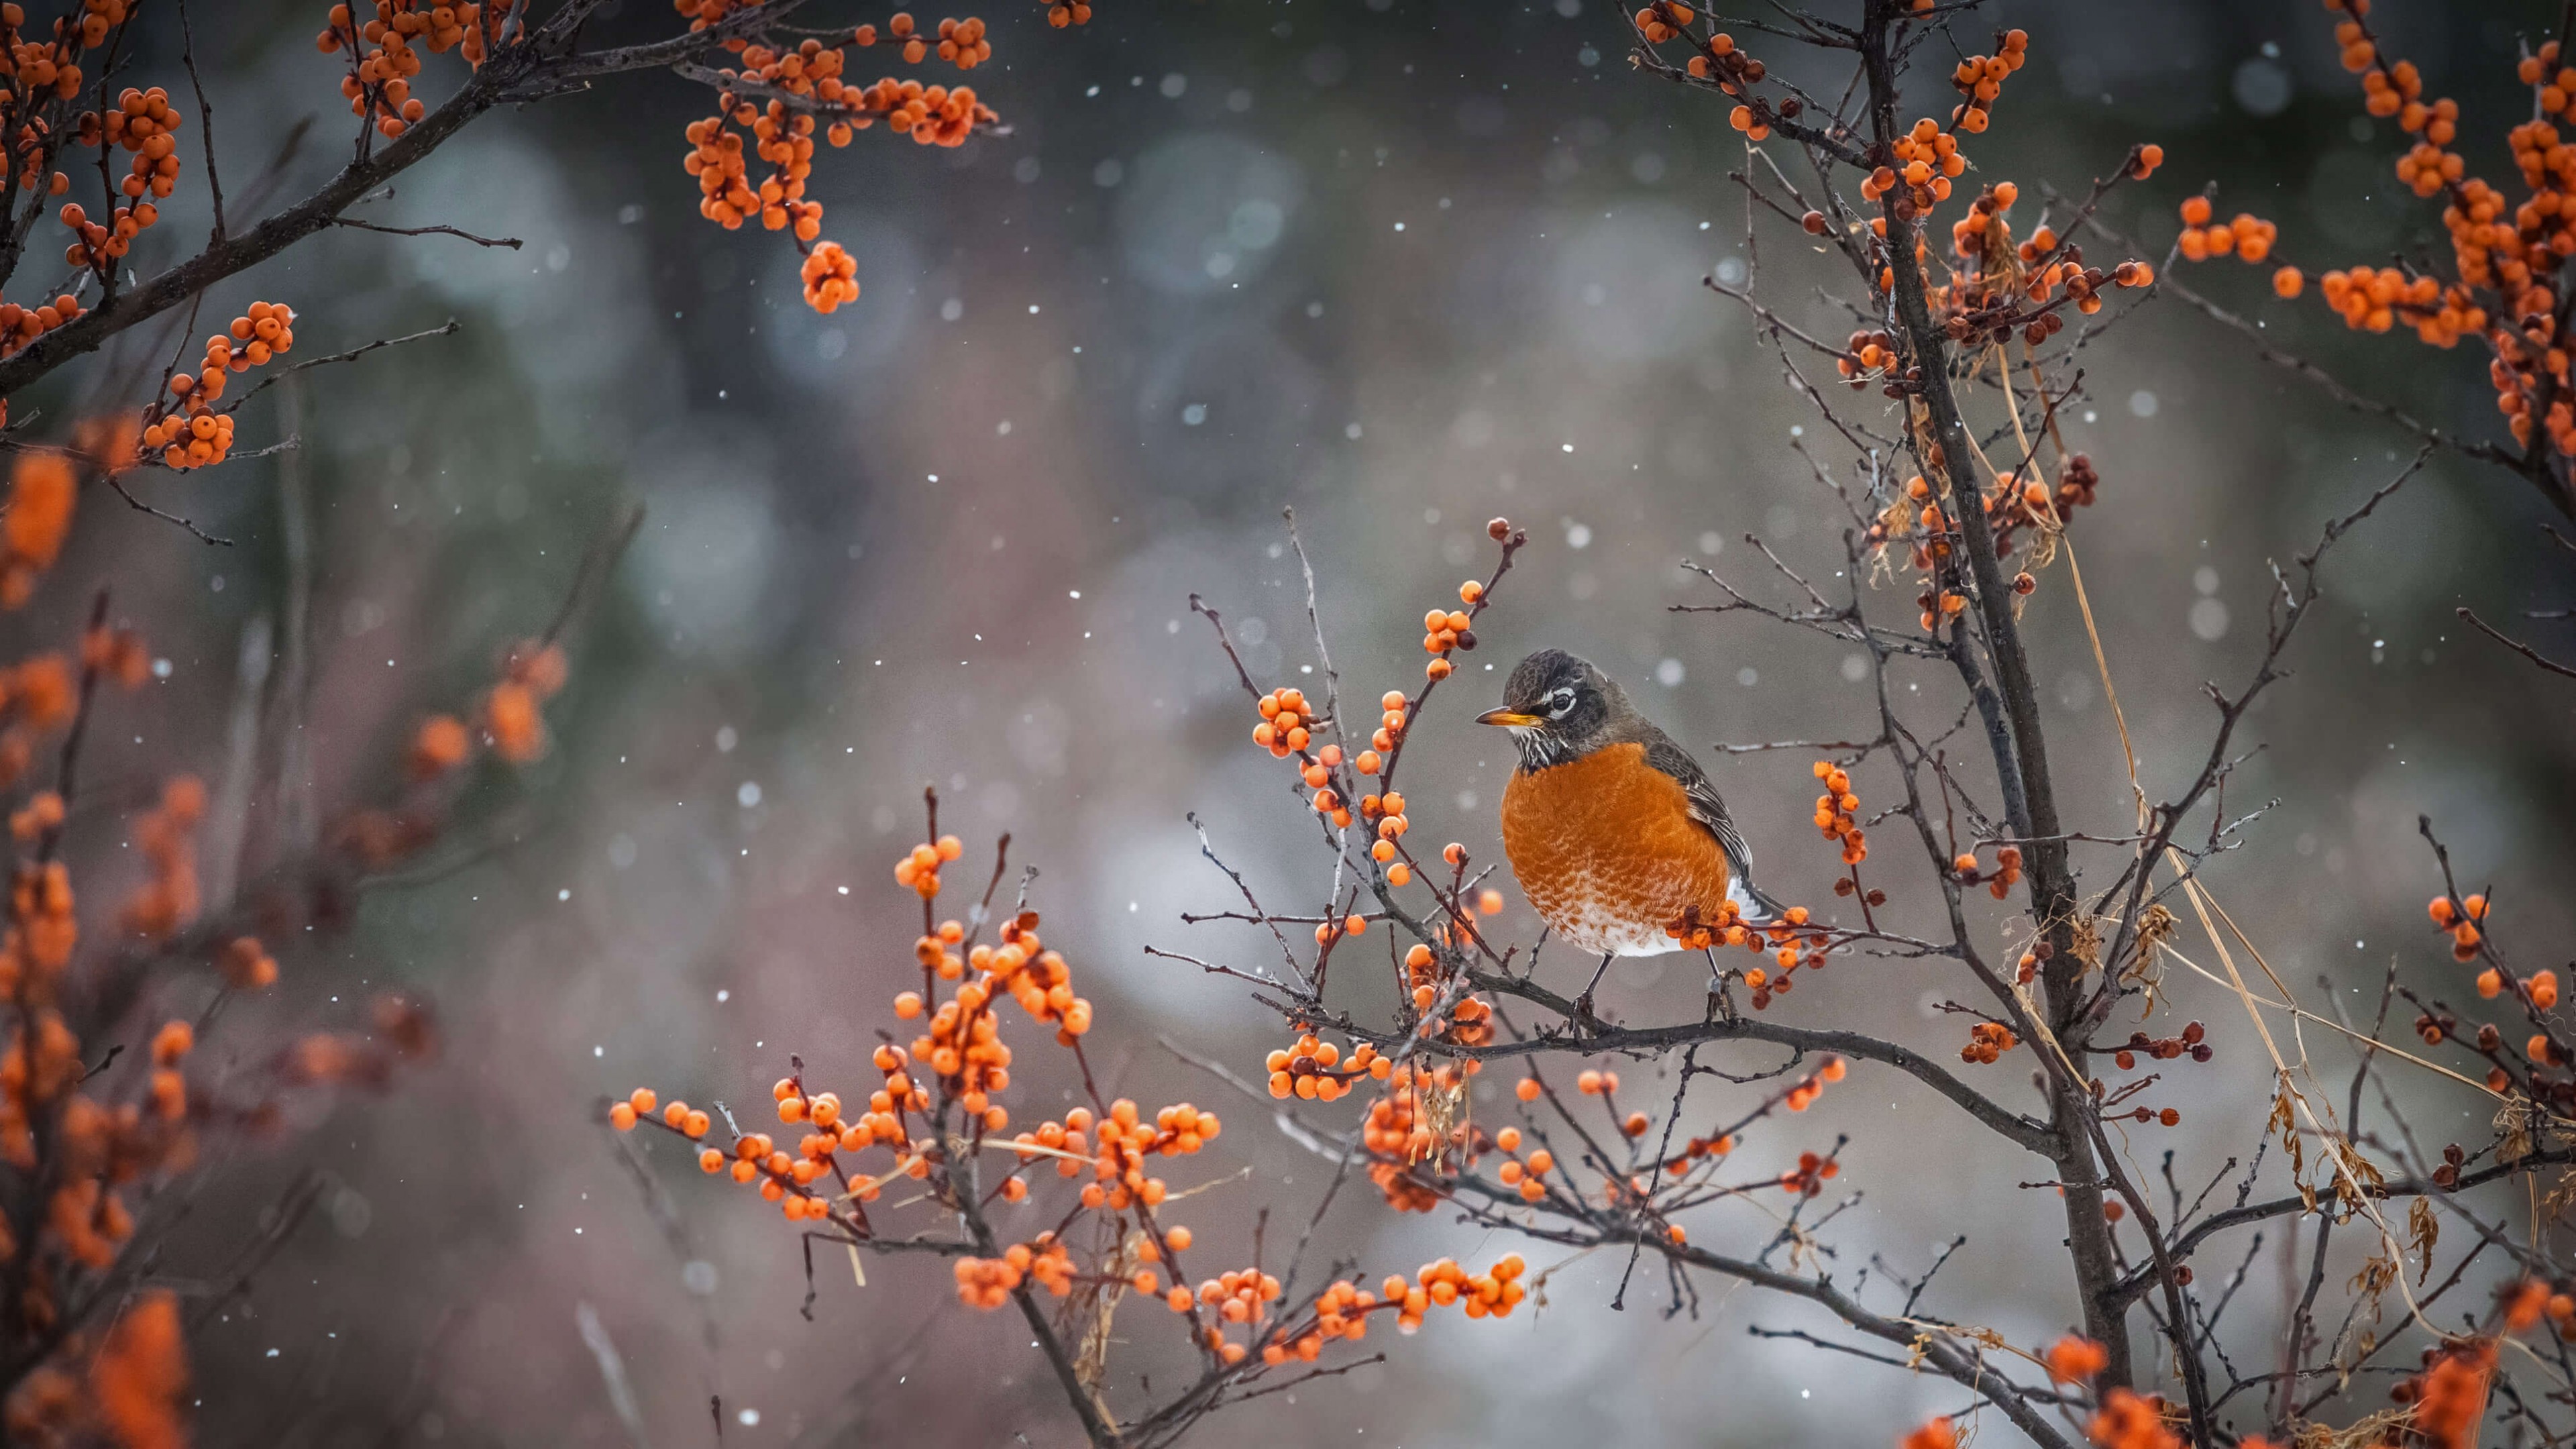 General 3840x2160 American Robin trees snow birds nature simple background minimalism robins